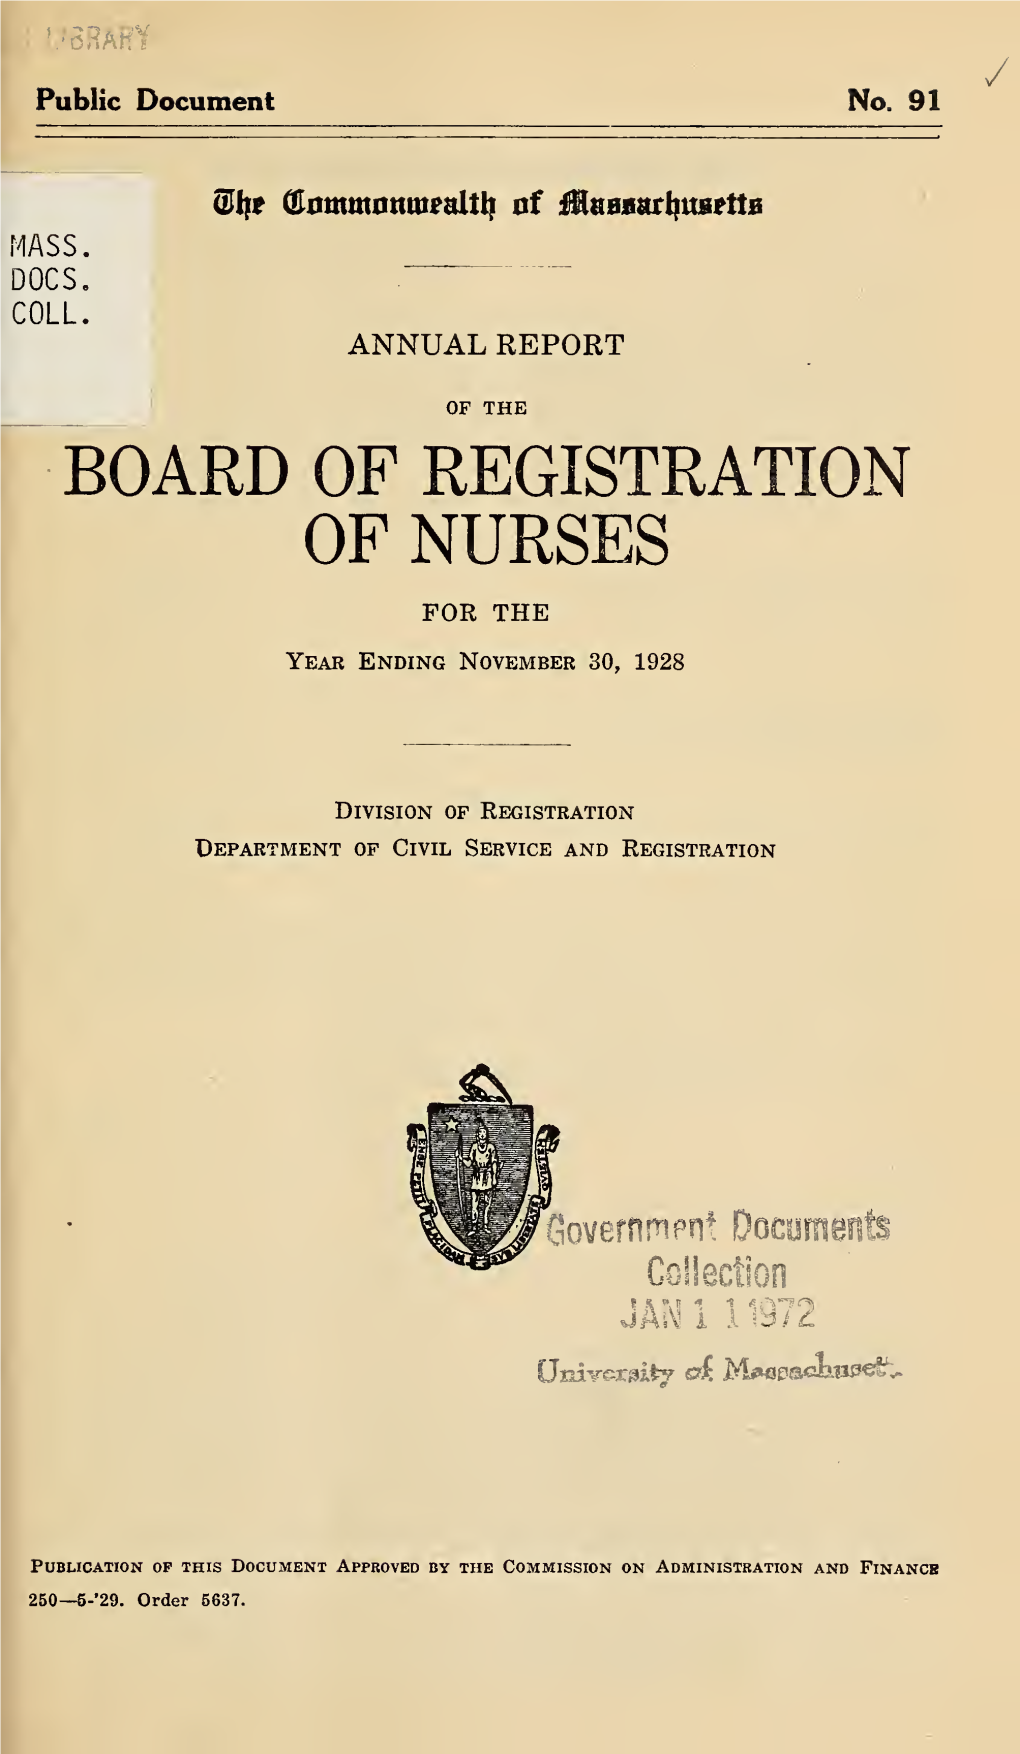 Annual Report of the Board of Registration of Nurses